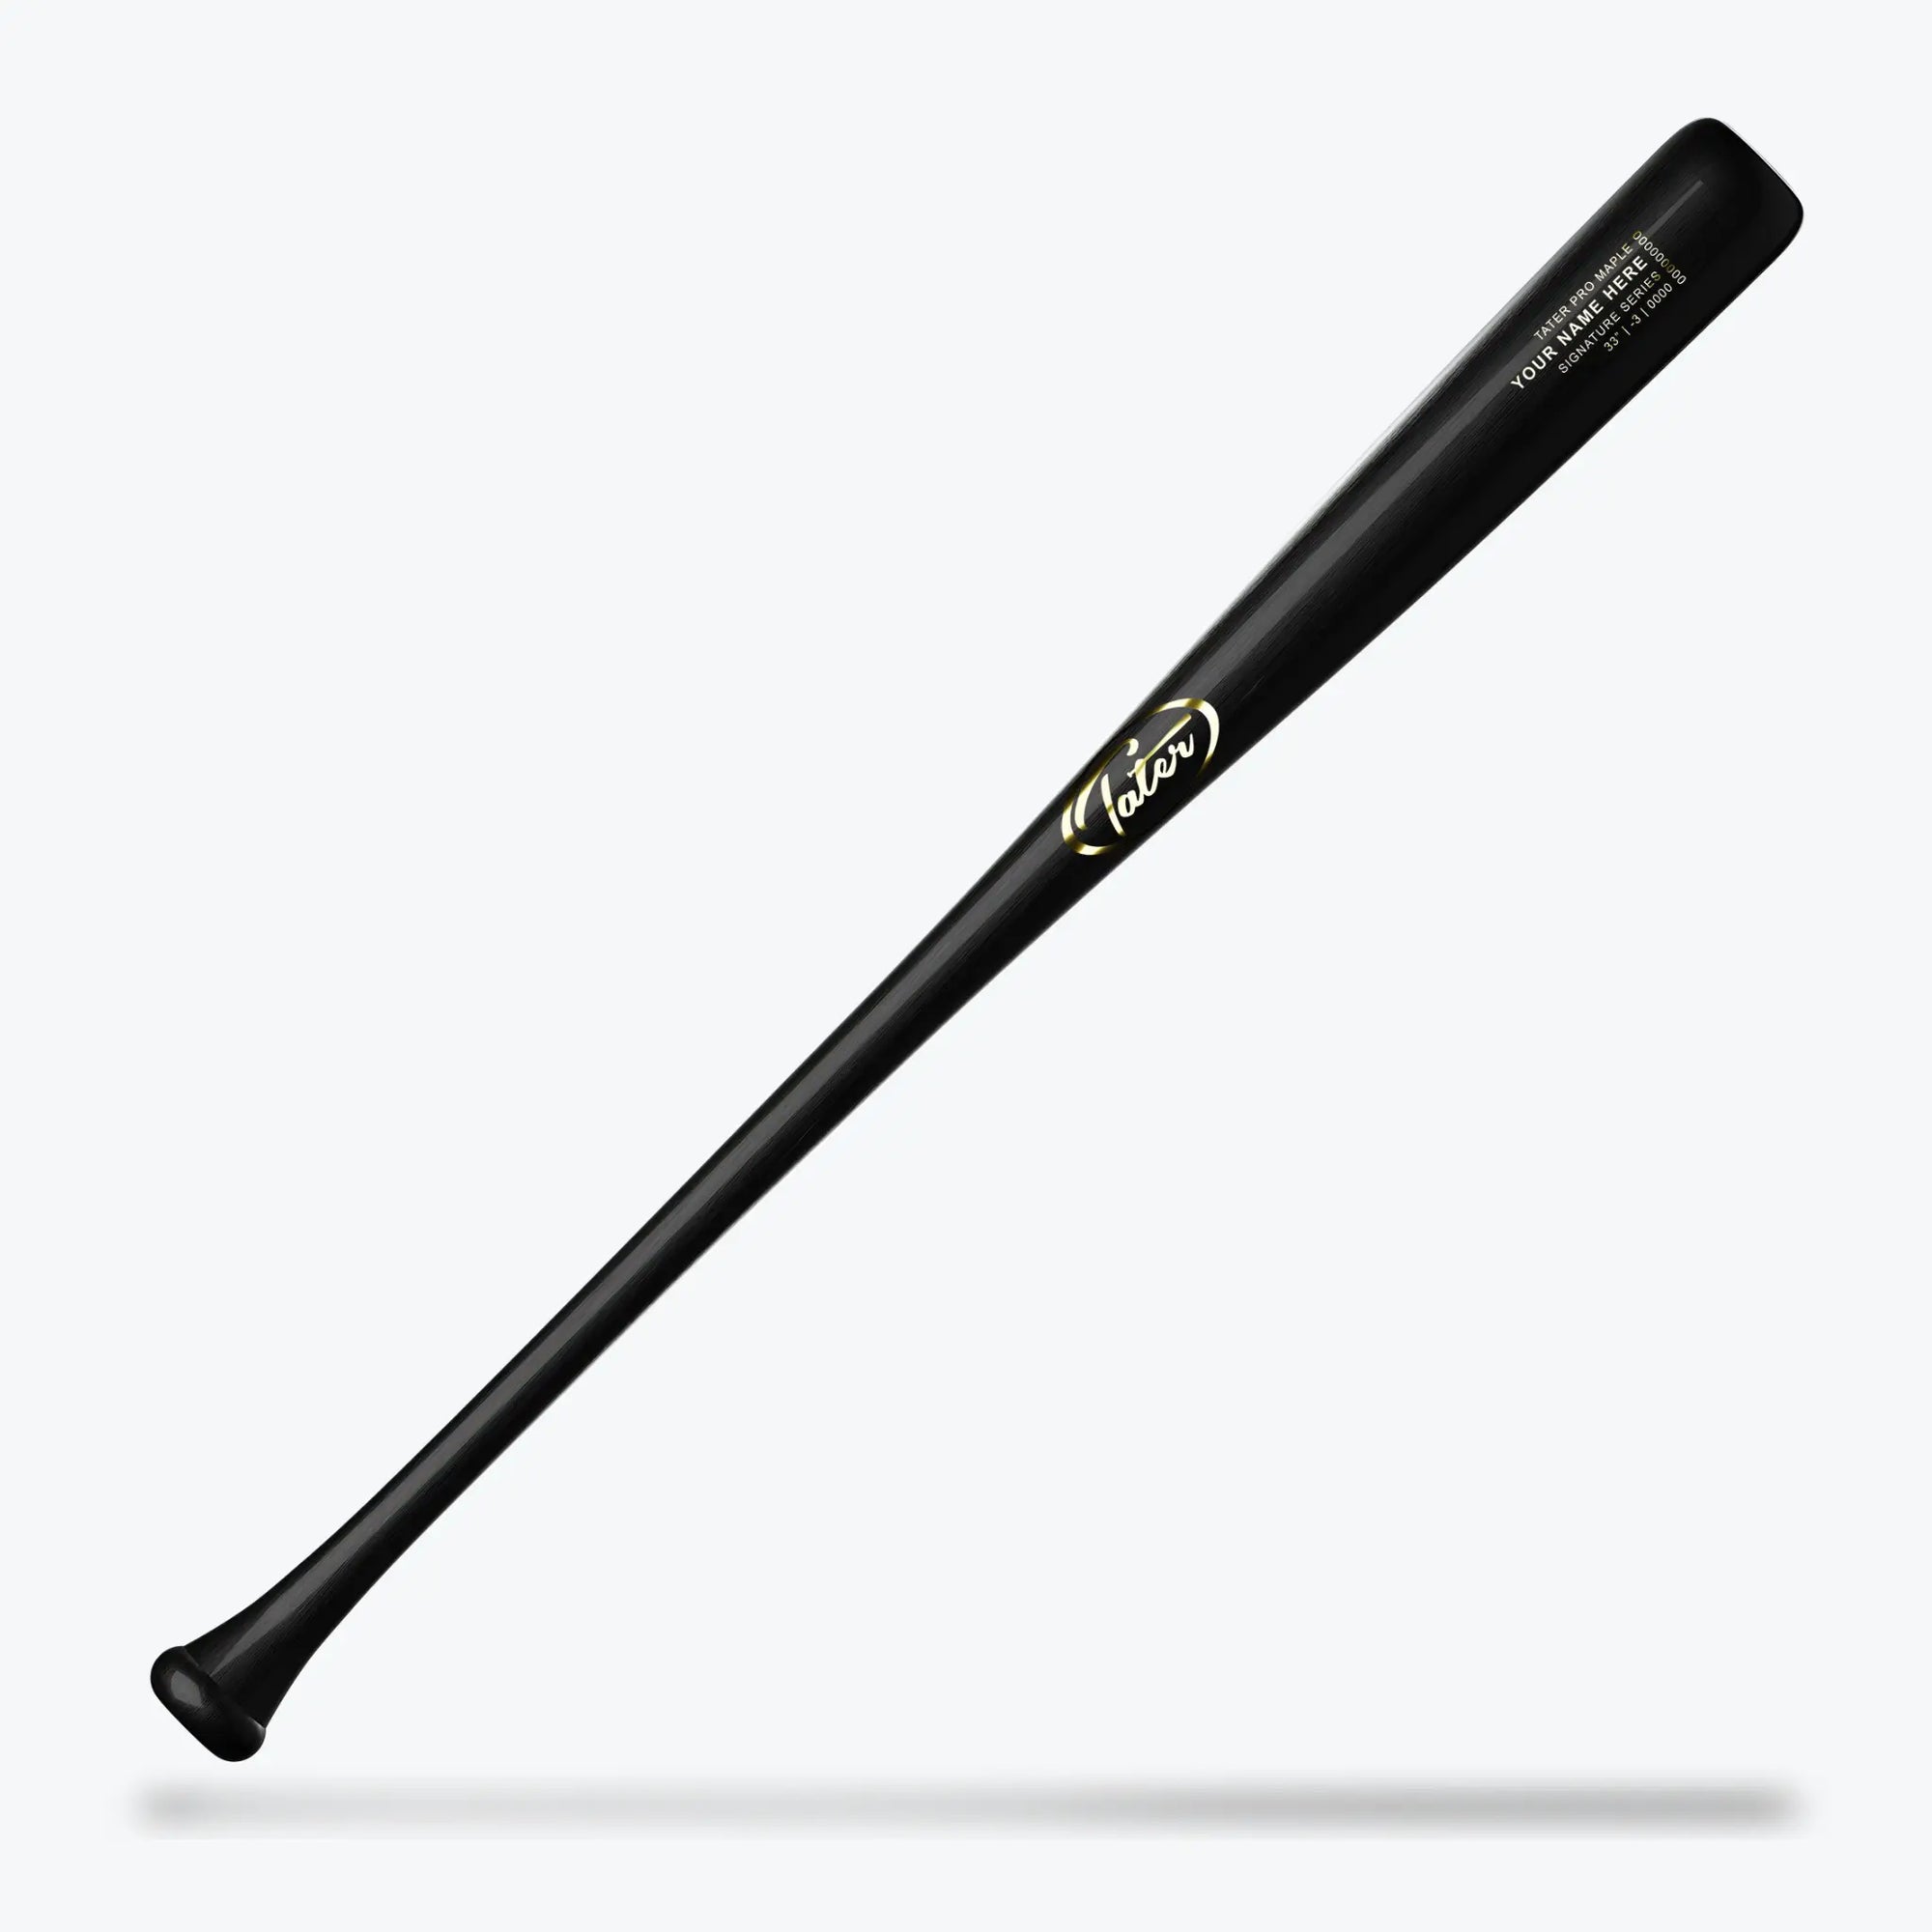 The photo features the Tater X24 Custom Wood Bat, entirely in black with a glossy finish that highlights the brand's elegant gold logo. This drop-3 bat is a standout choice for players looking for an alternative to the Victus lineup, blending style with competitive functionality.